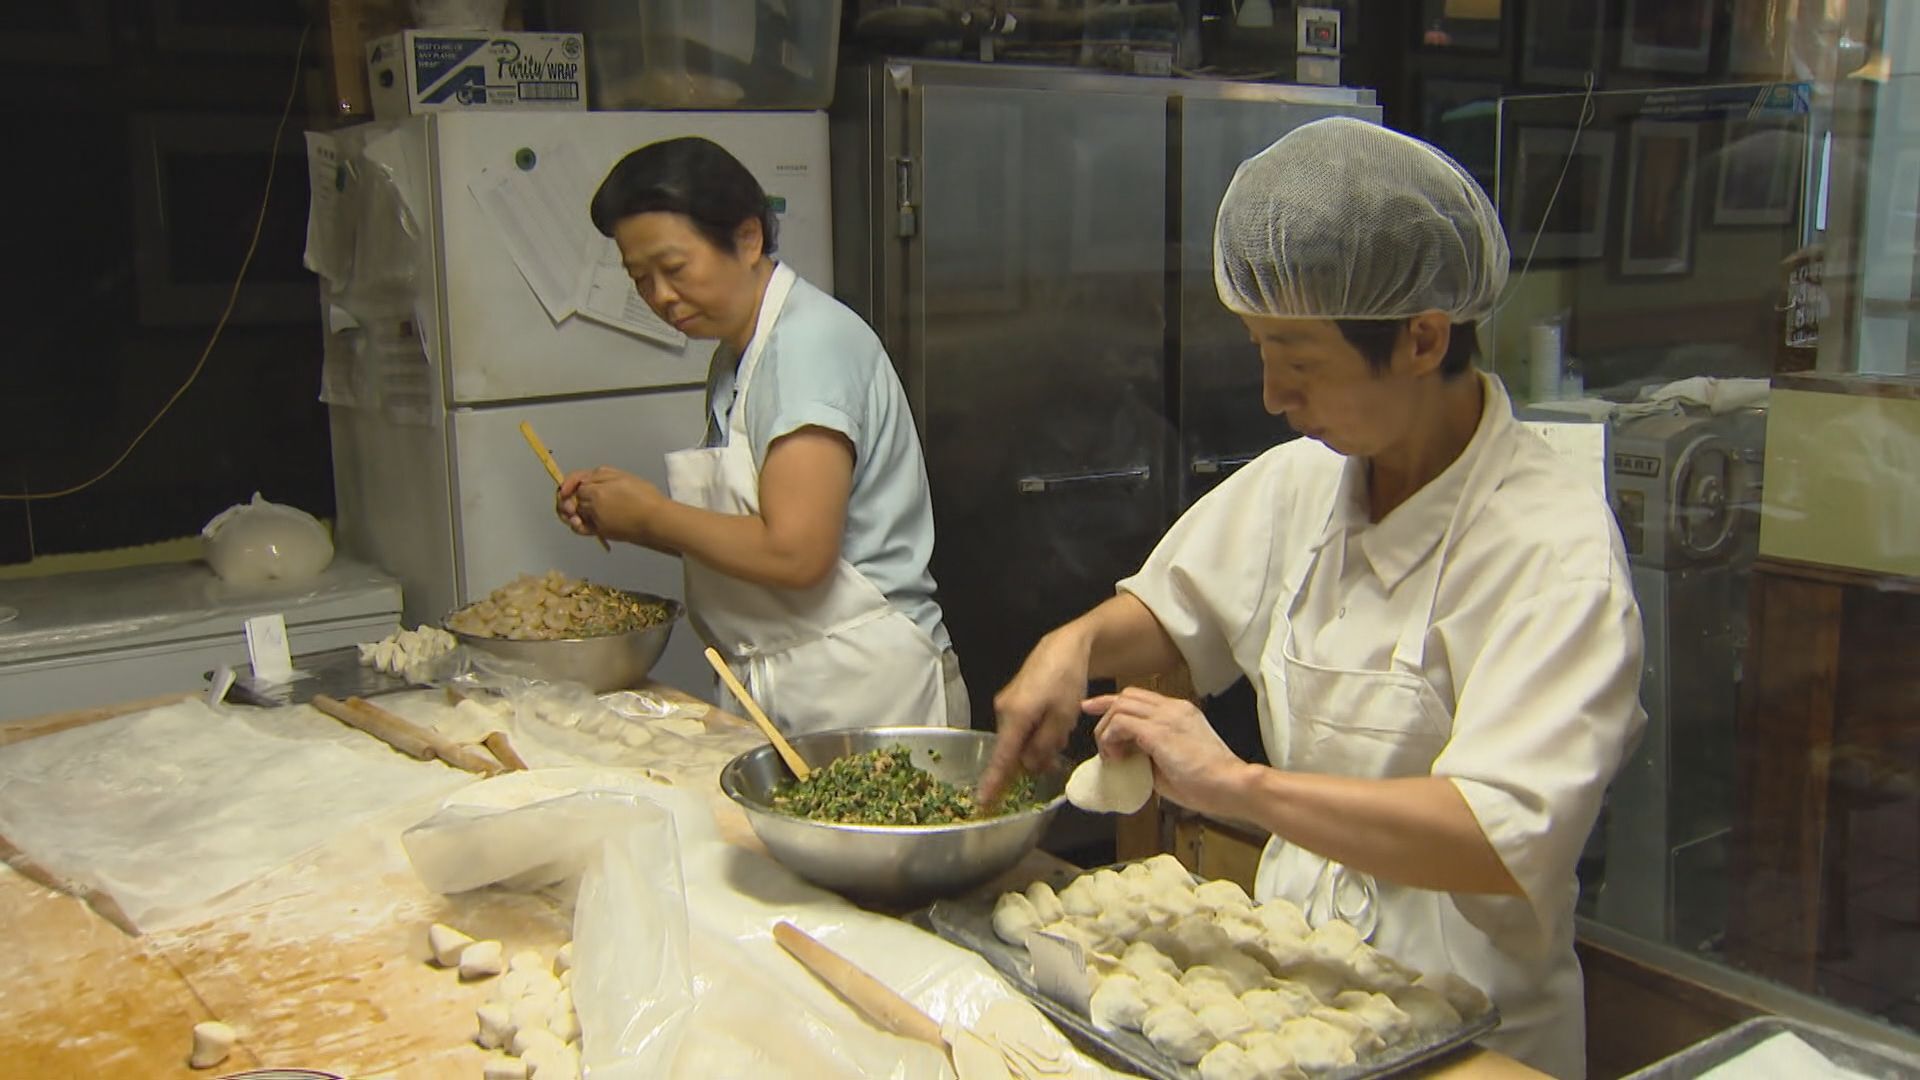 A popular dumpling spot in Chinatown is being recognized